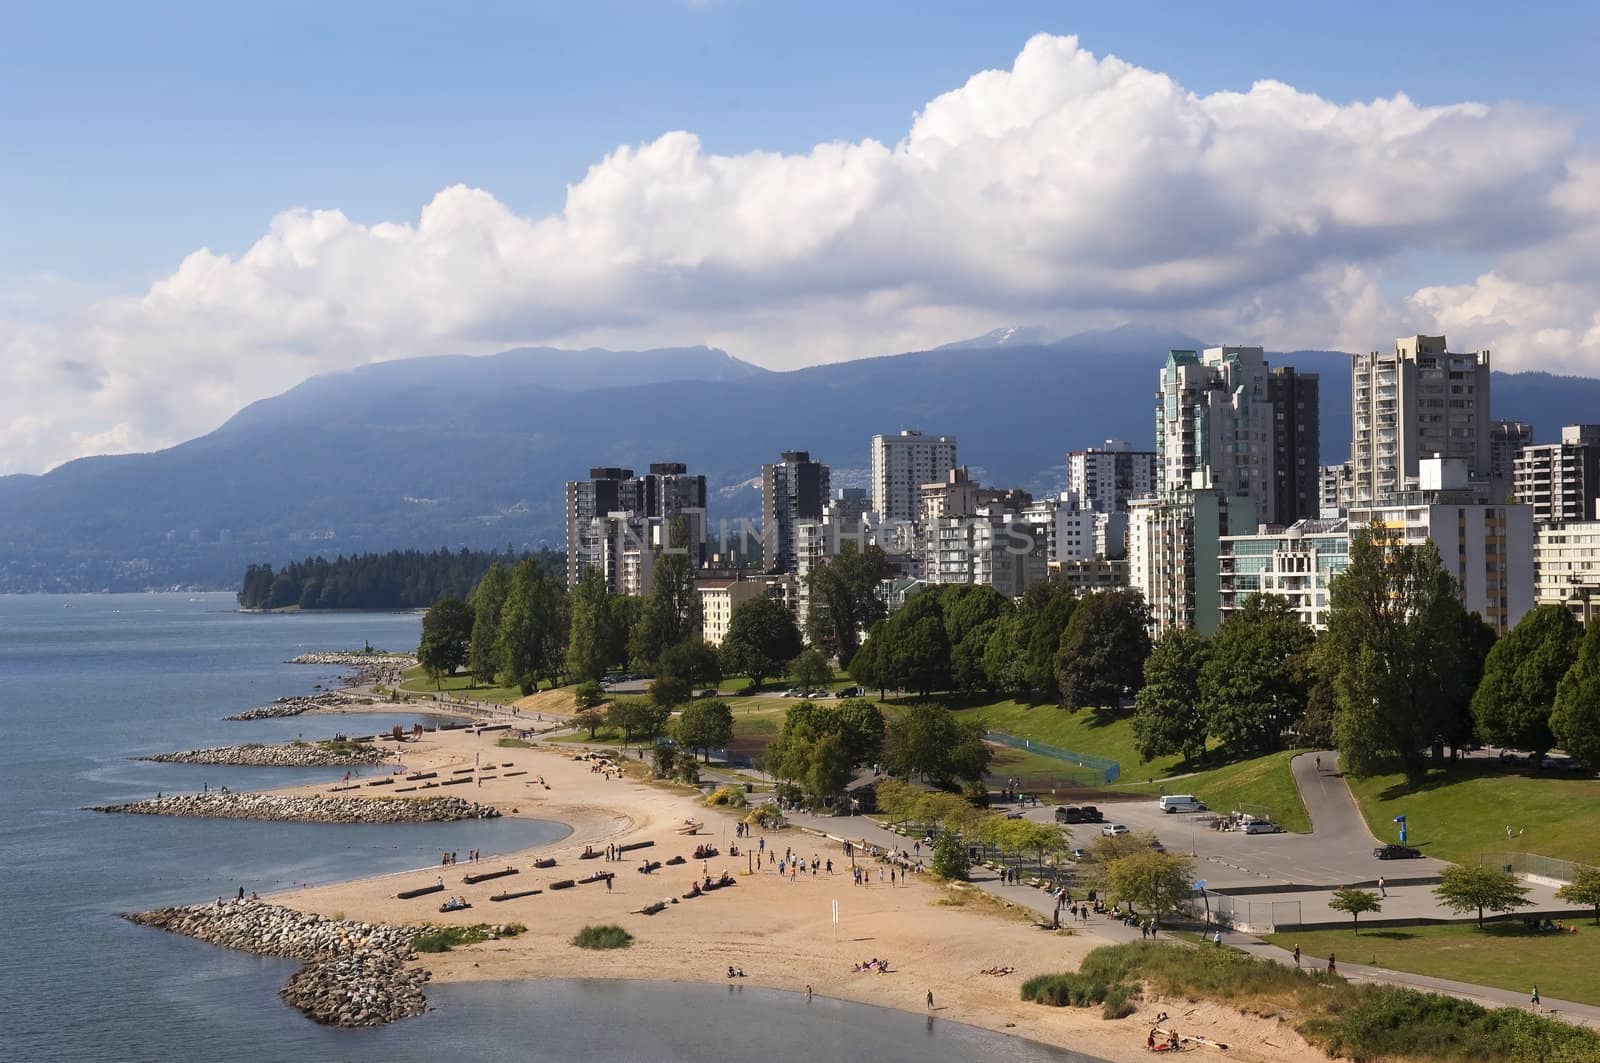 Vancouver, on the beach by irisphoto4